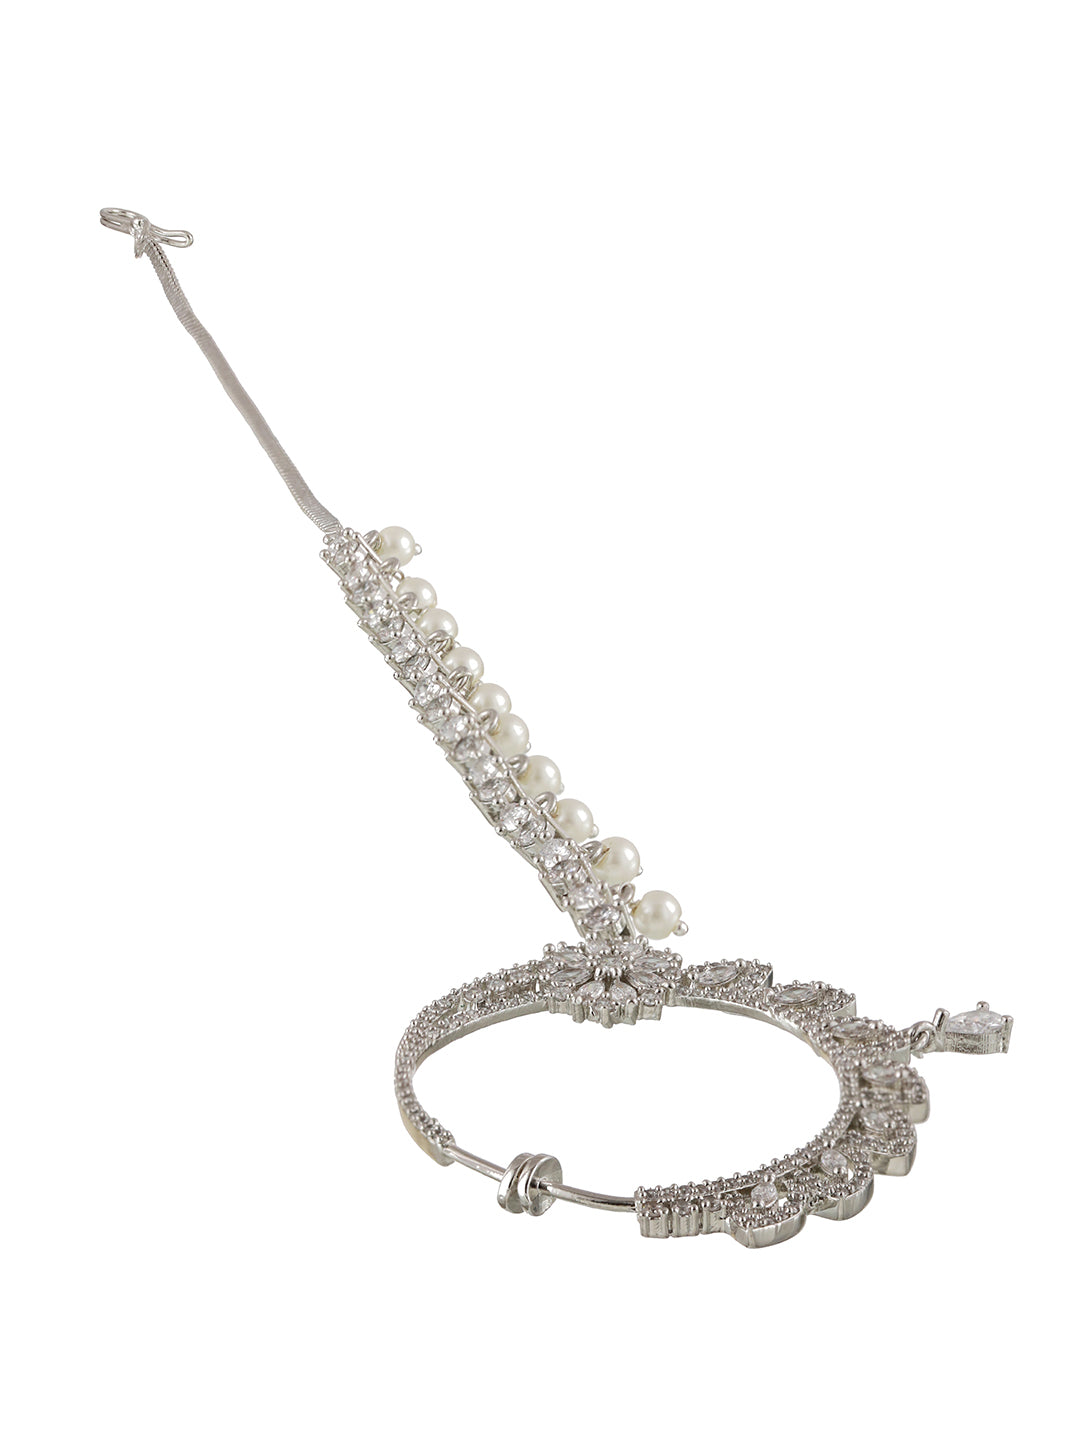 Silver Plated White Floral American Diamond Studded Handcrafted Nose Ring With Pearl Drop Chain